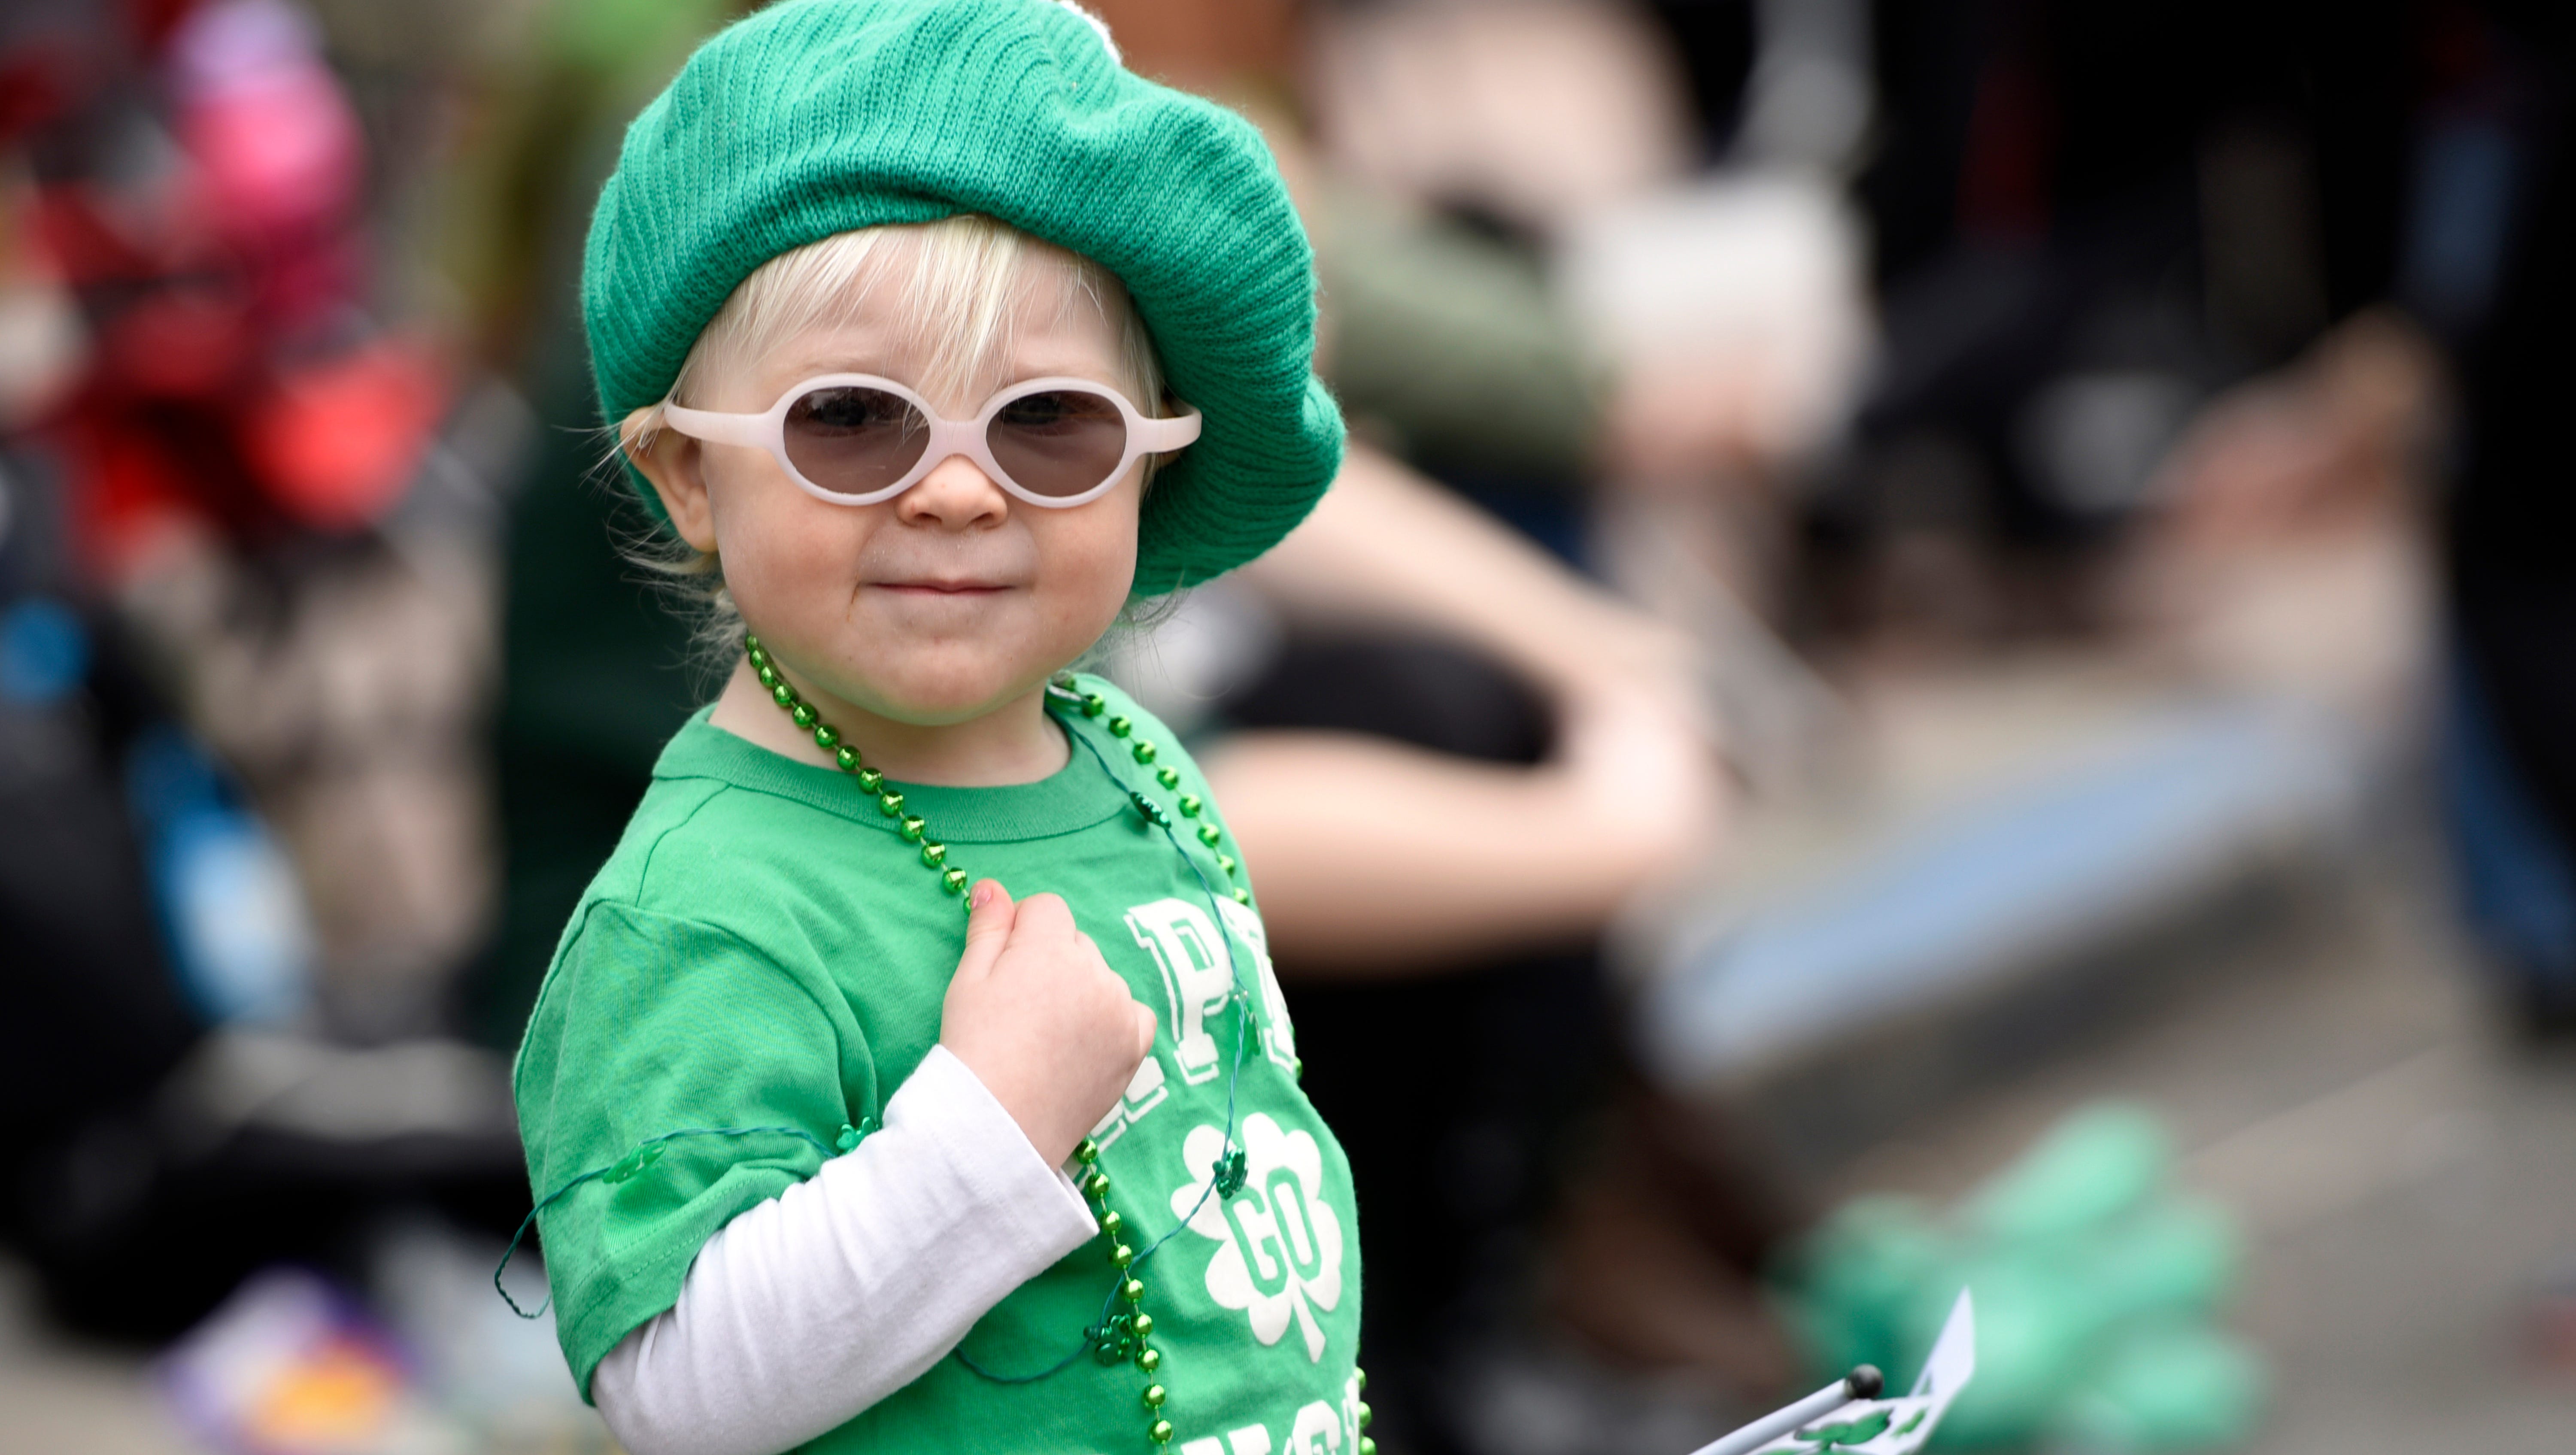 fiesta Alerta Repelente 7 St. Patrick's Day traditions explained